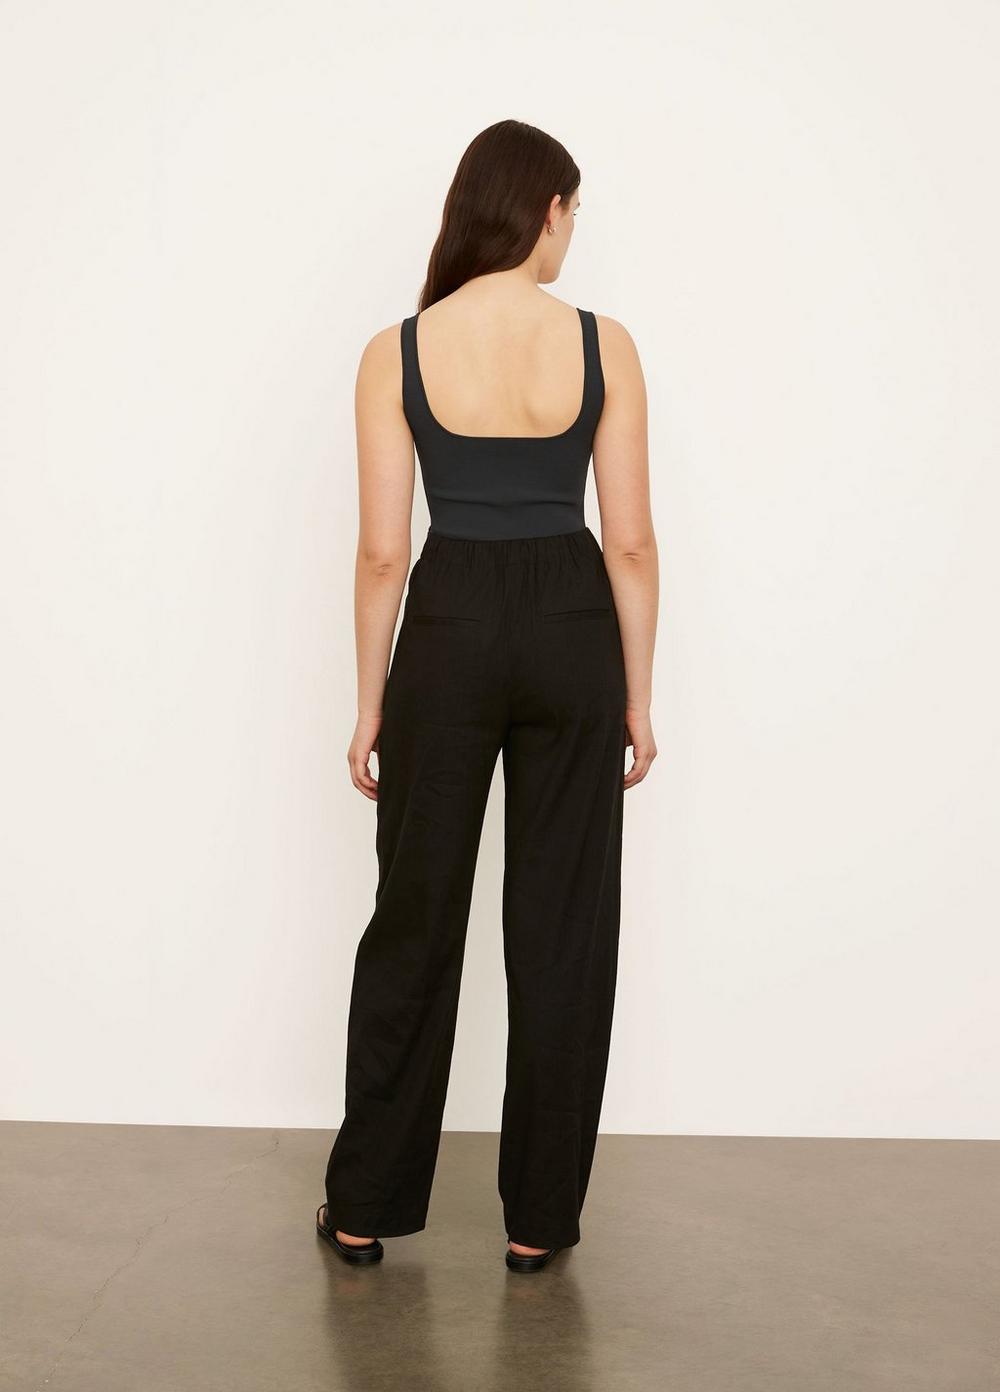 Pleat Front Pull On Pant